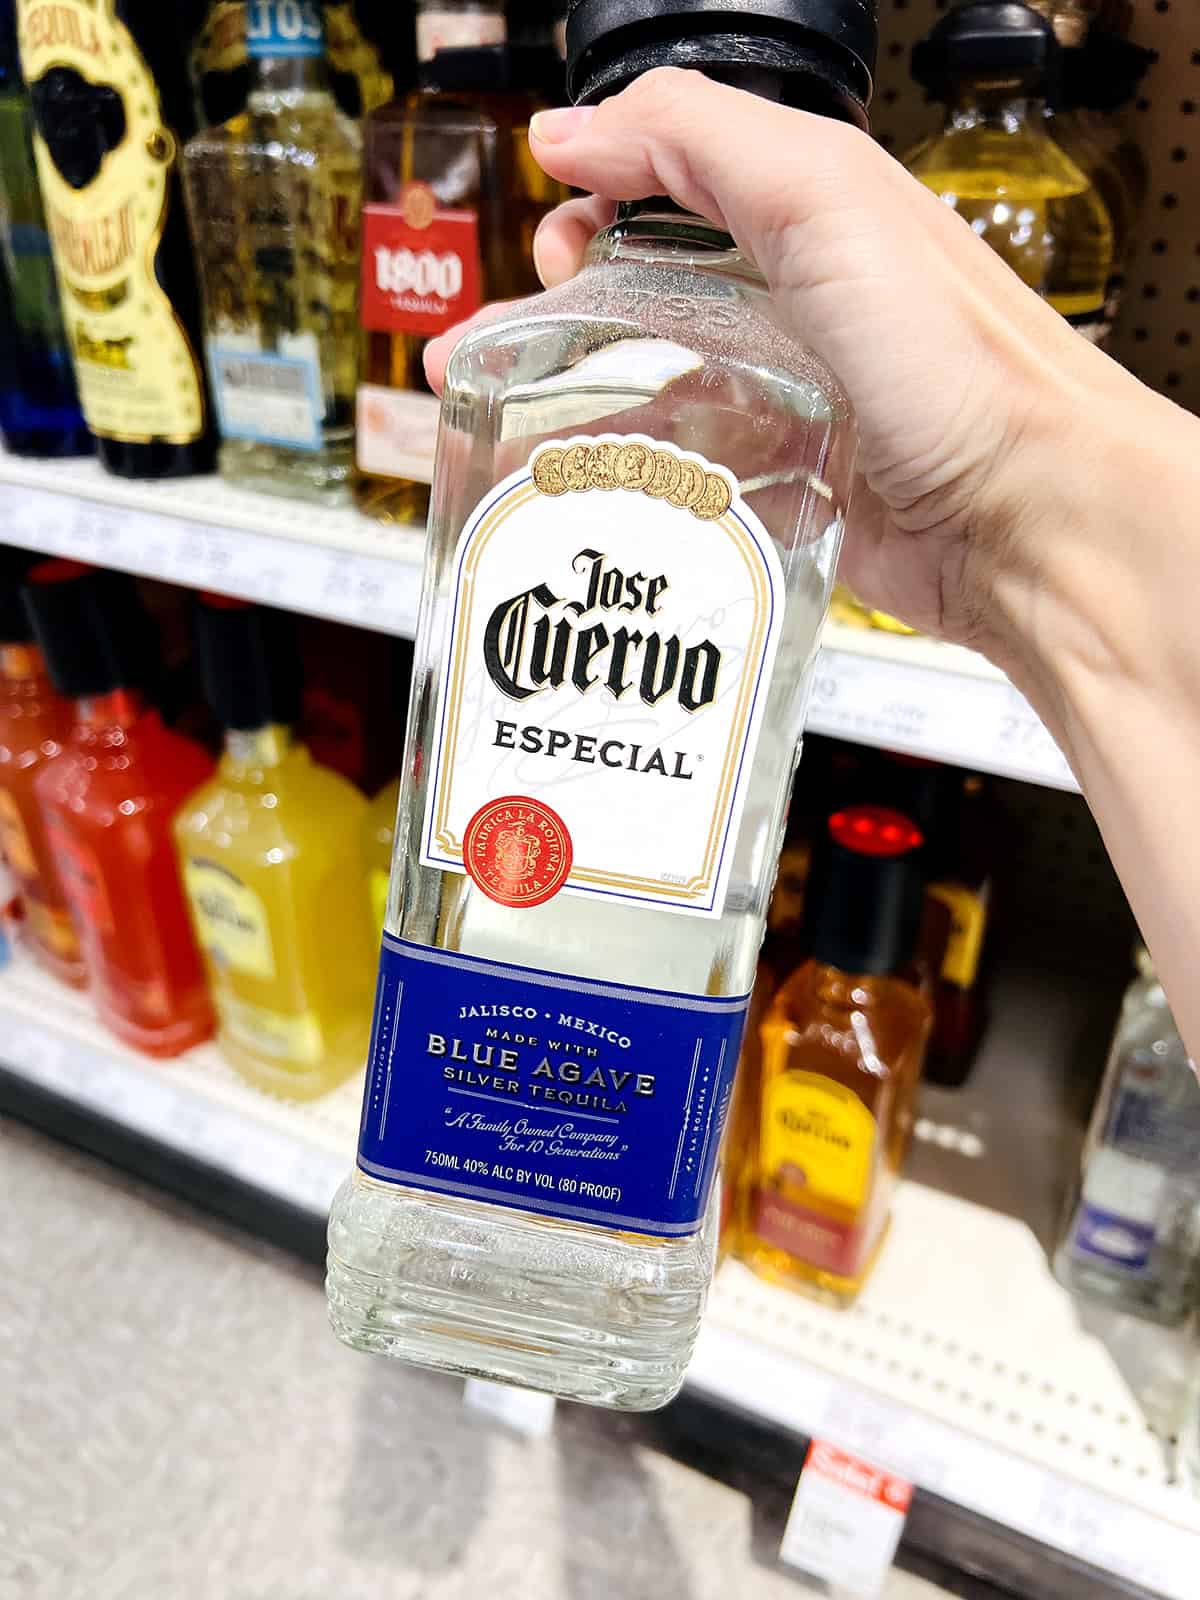 hand holding jose cuervo tequila bottle in grocery store aisle